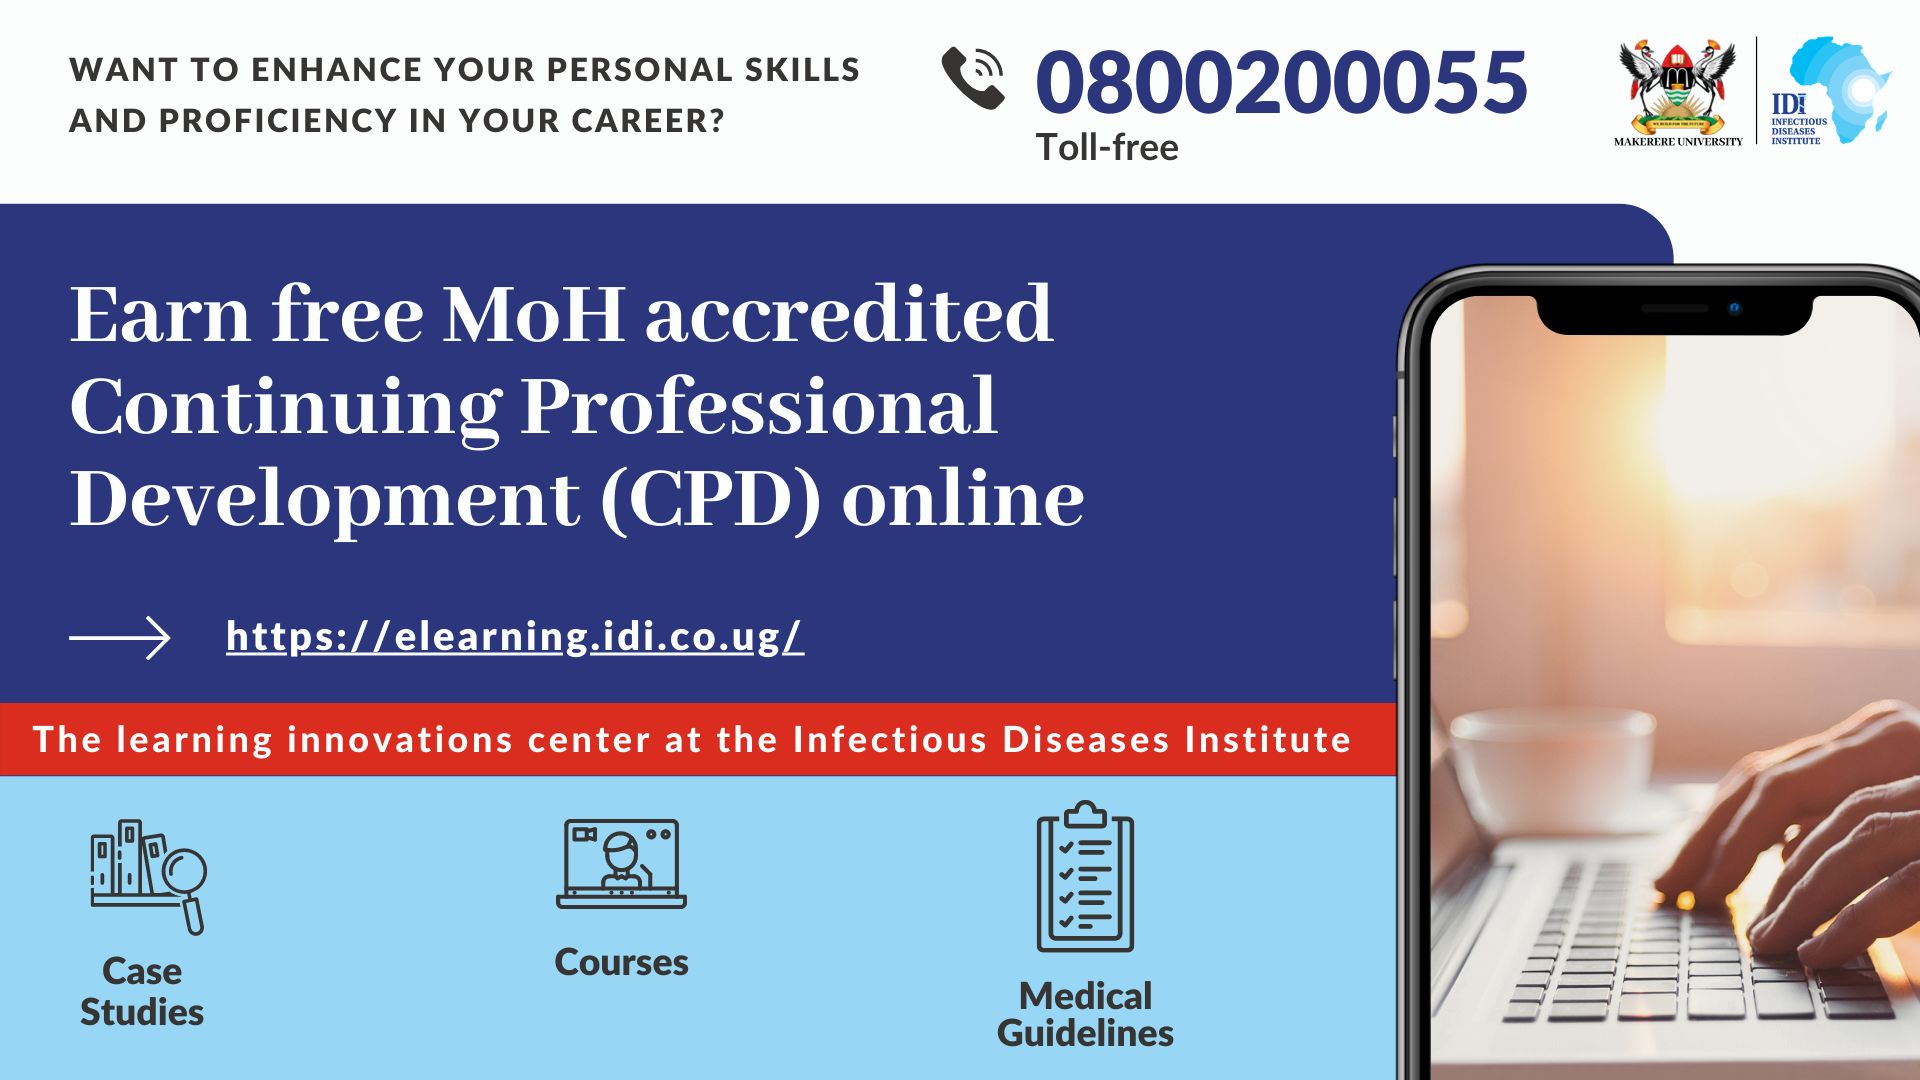 Free MoH-accredited Continuing Professional Development (CPD) online, Infectious Diseases Institute, Makerere University.